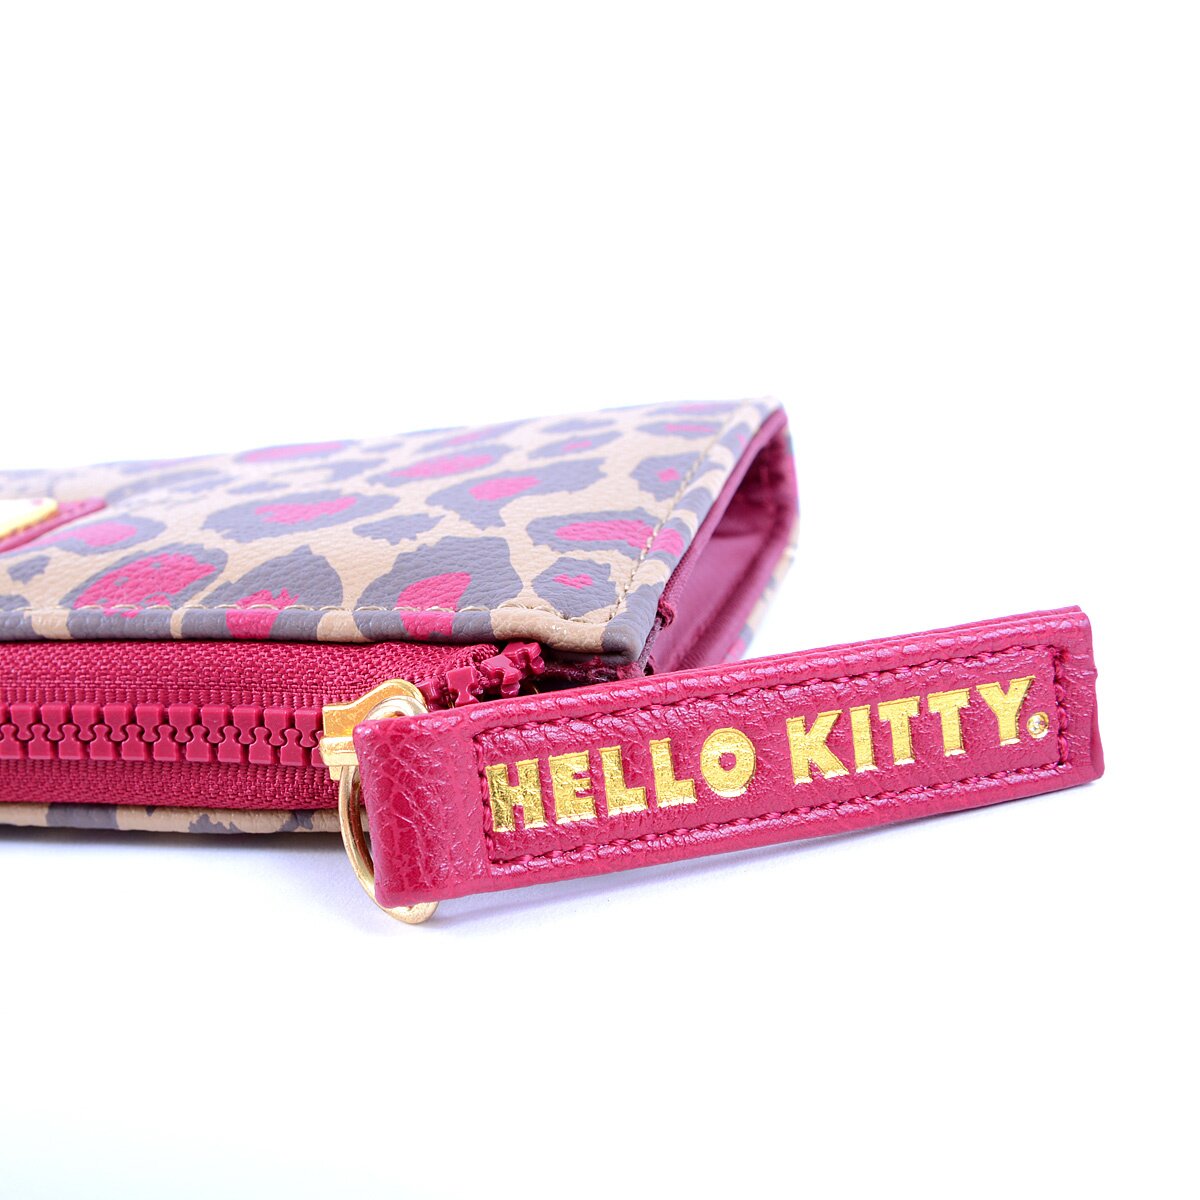 Hello Kitty LV style. Would you carry this?